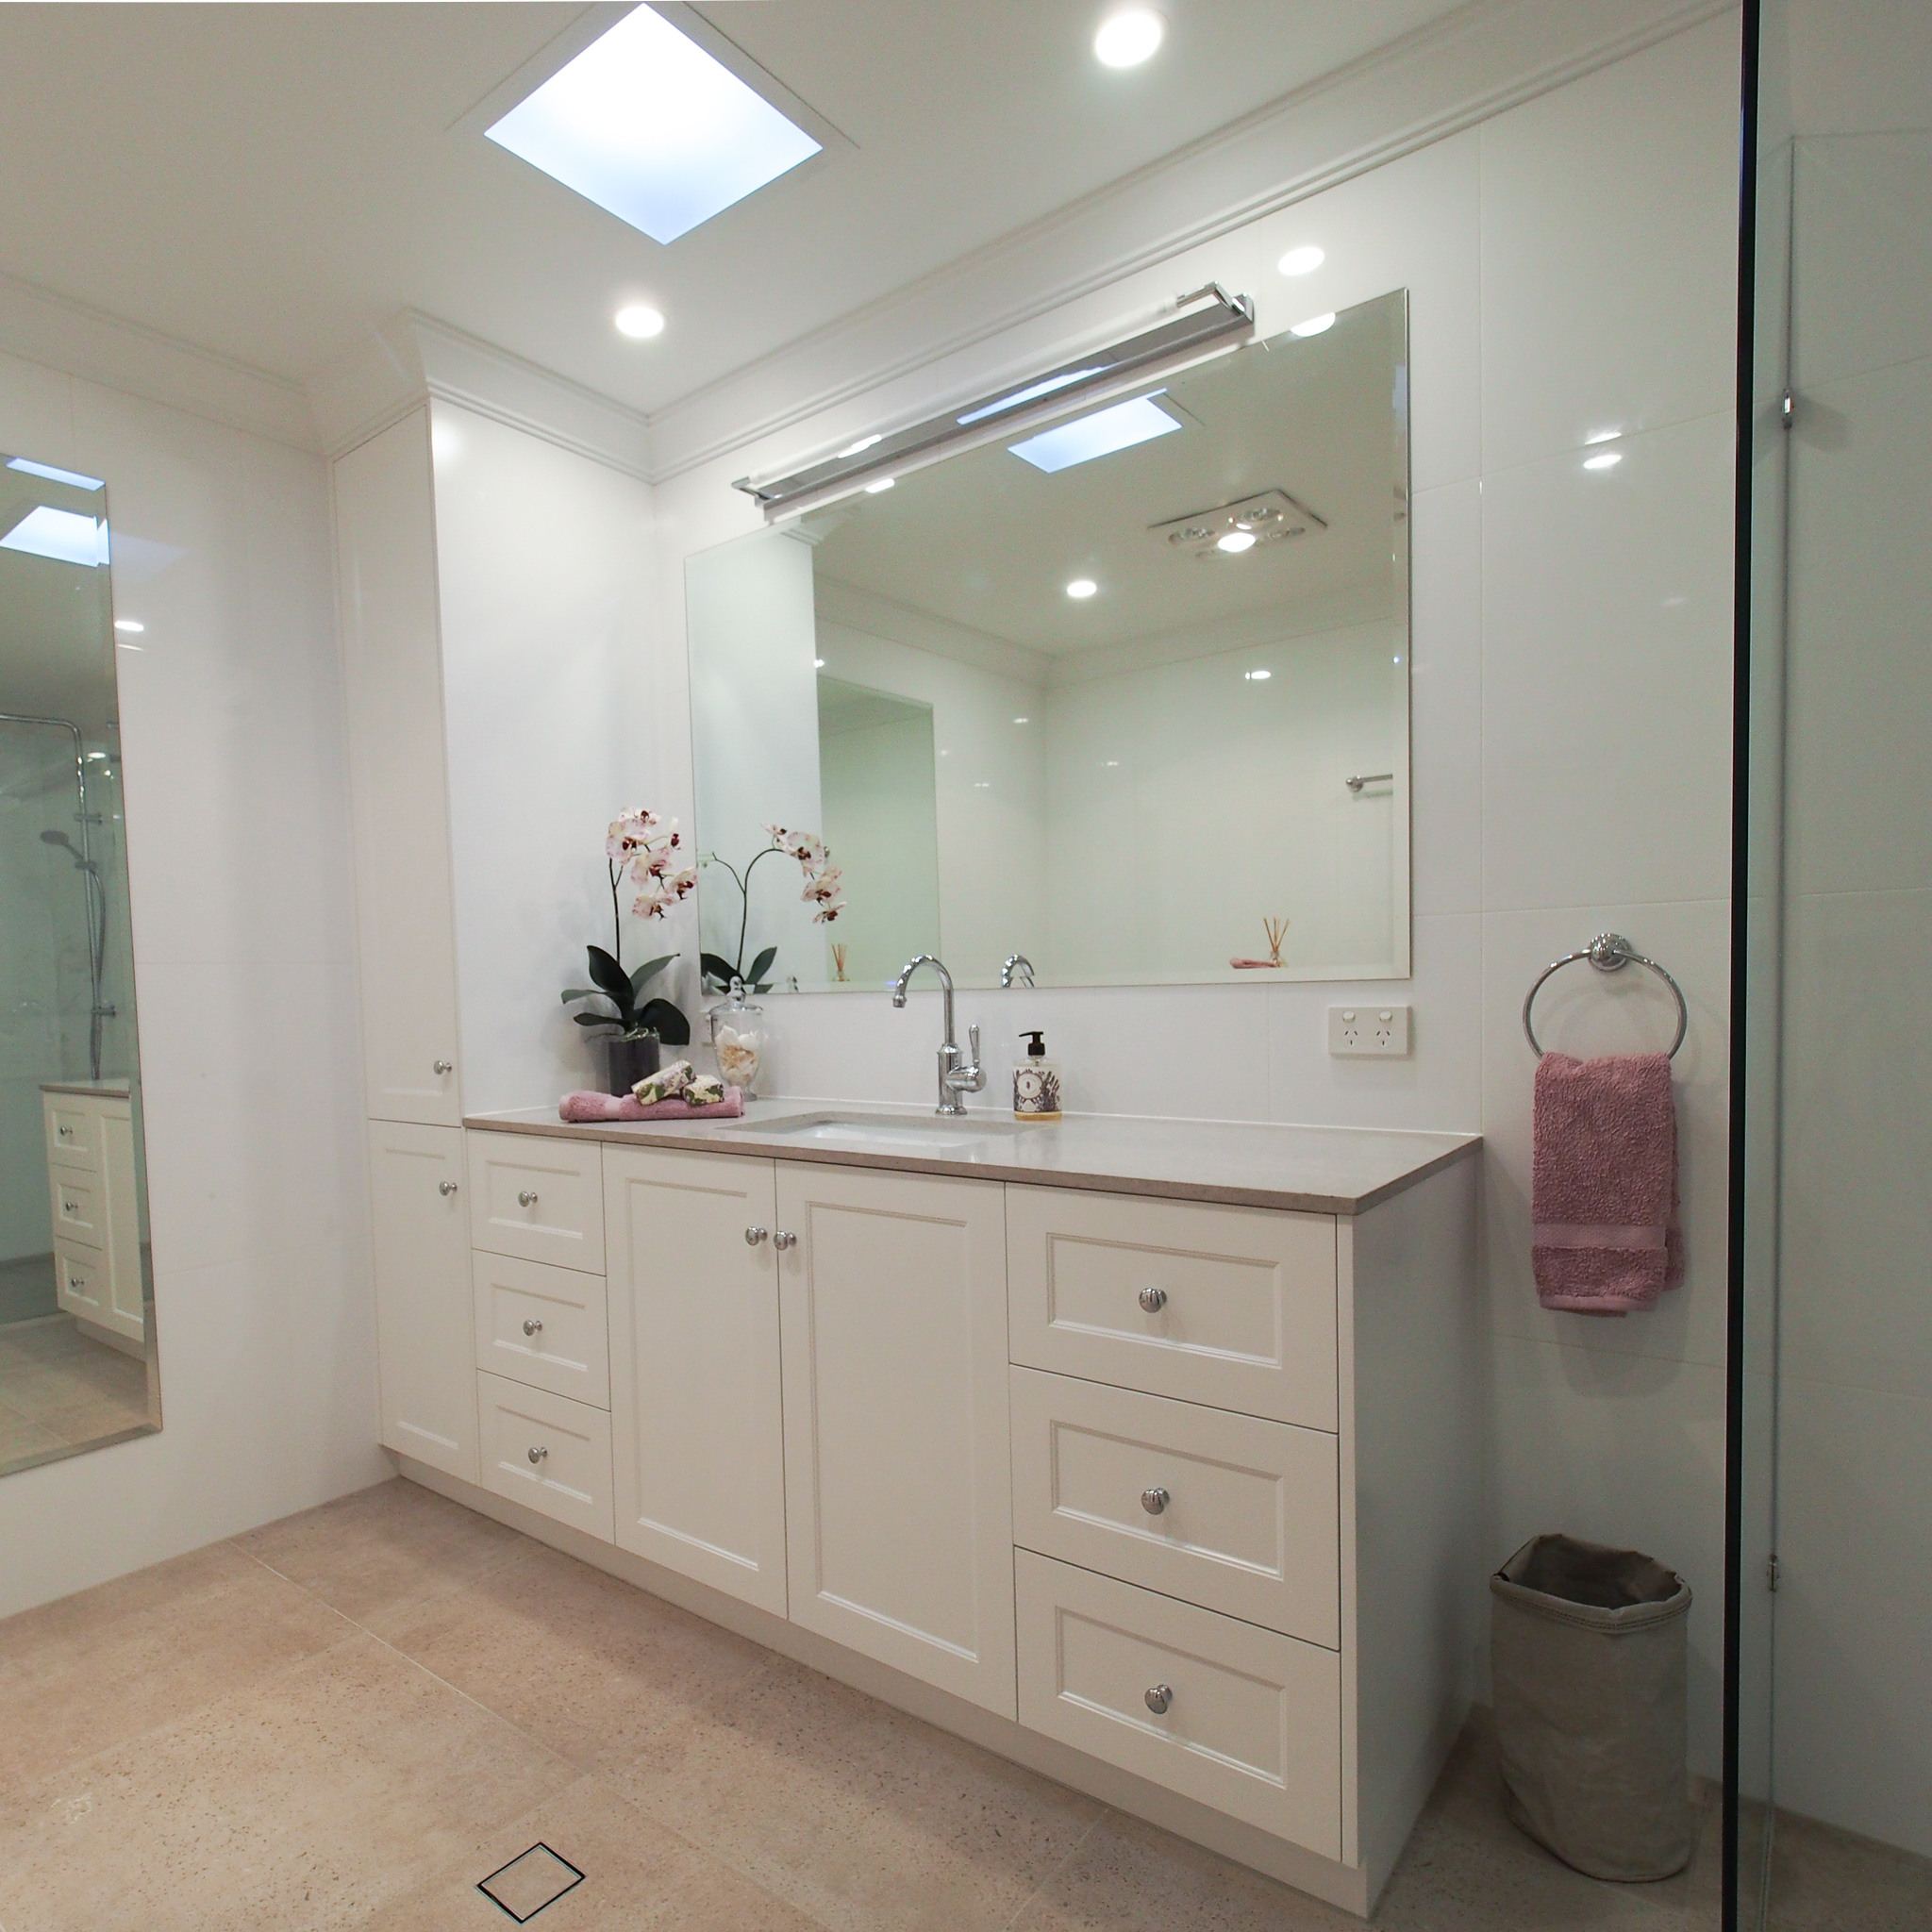 Vanity and linen cupboard, full length mirror, glass panel shower screen